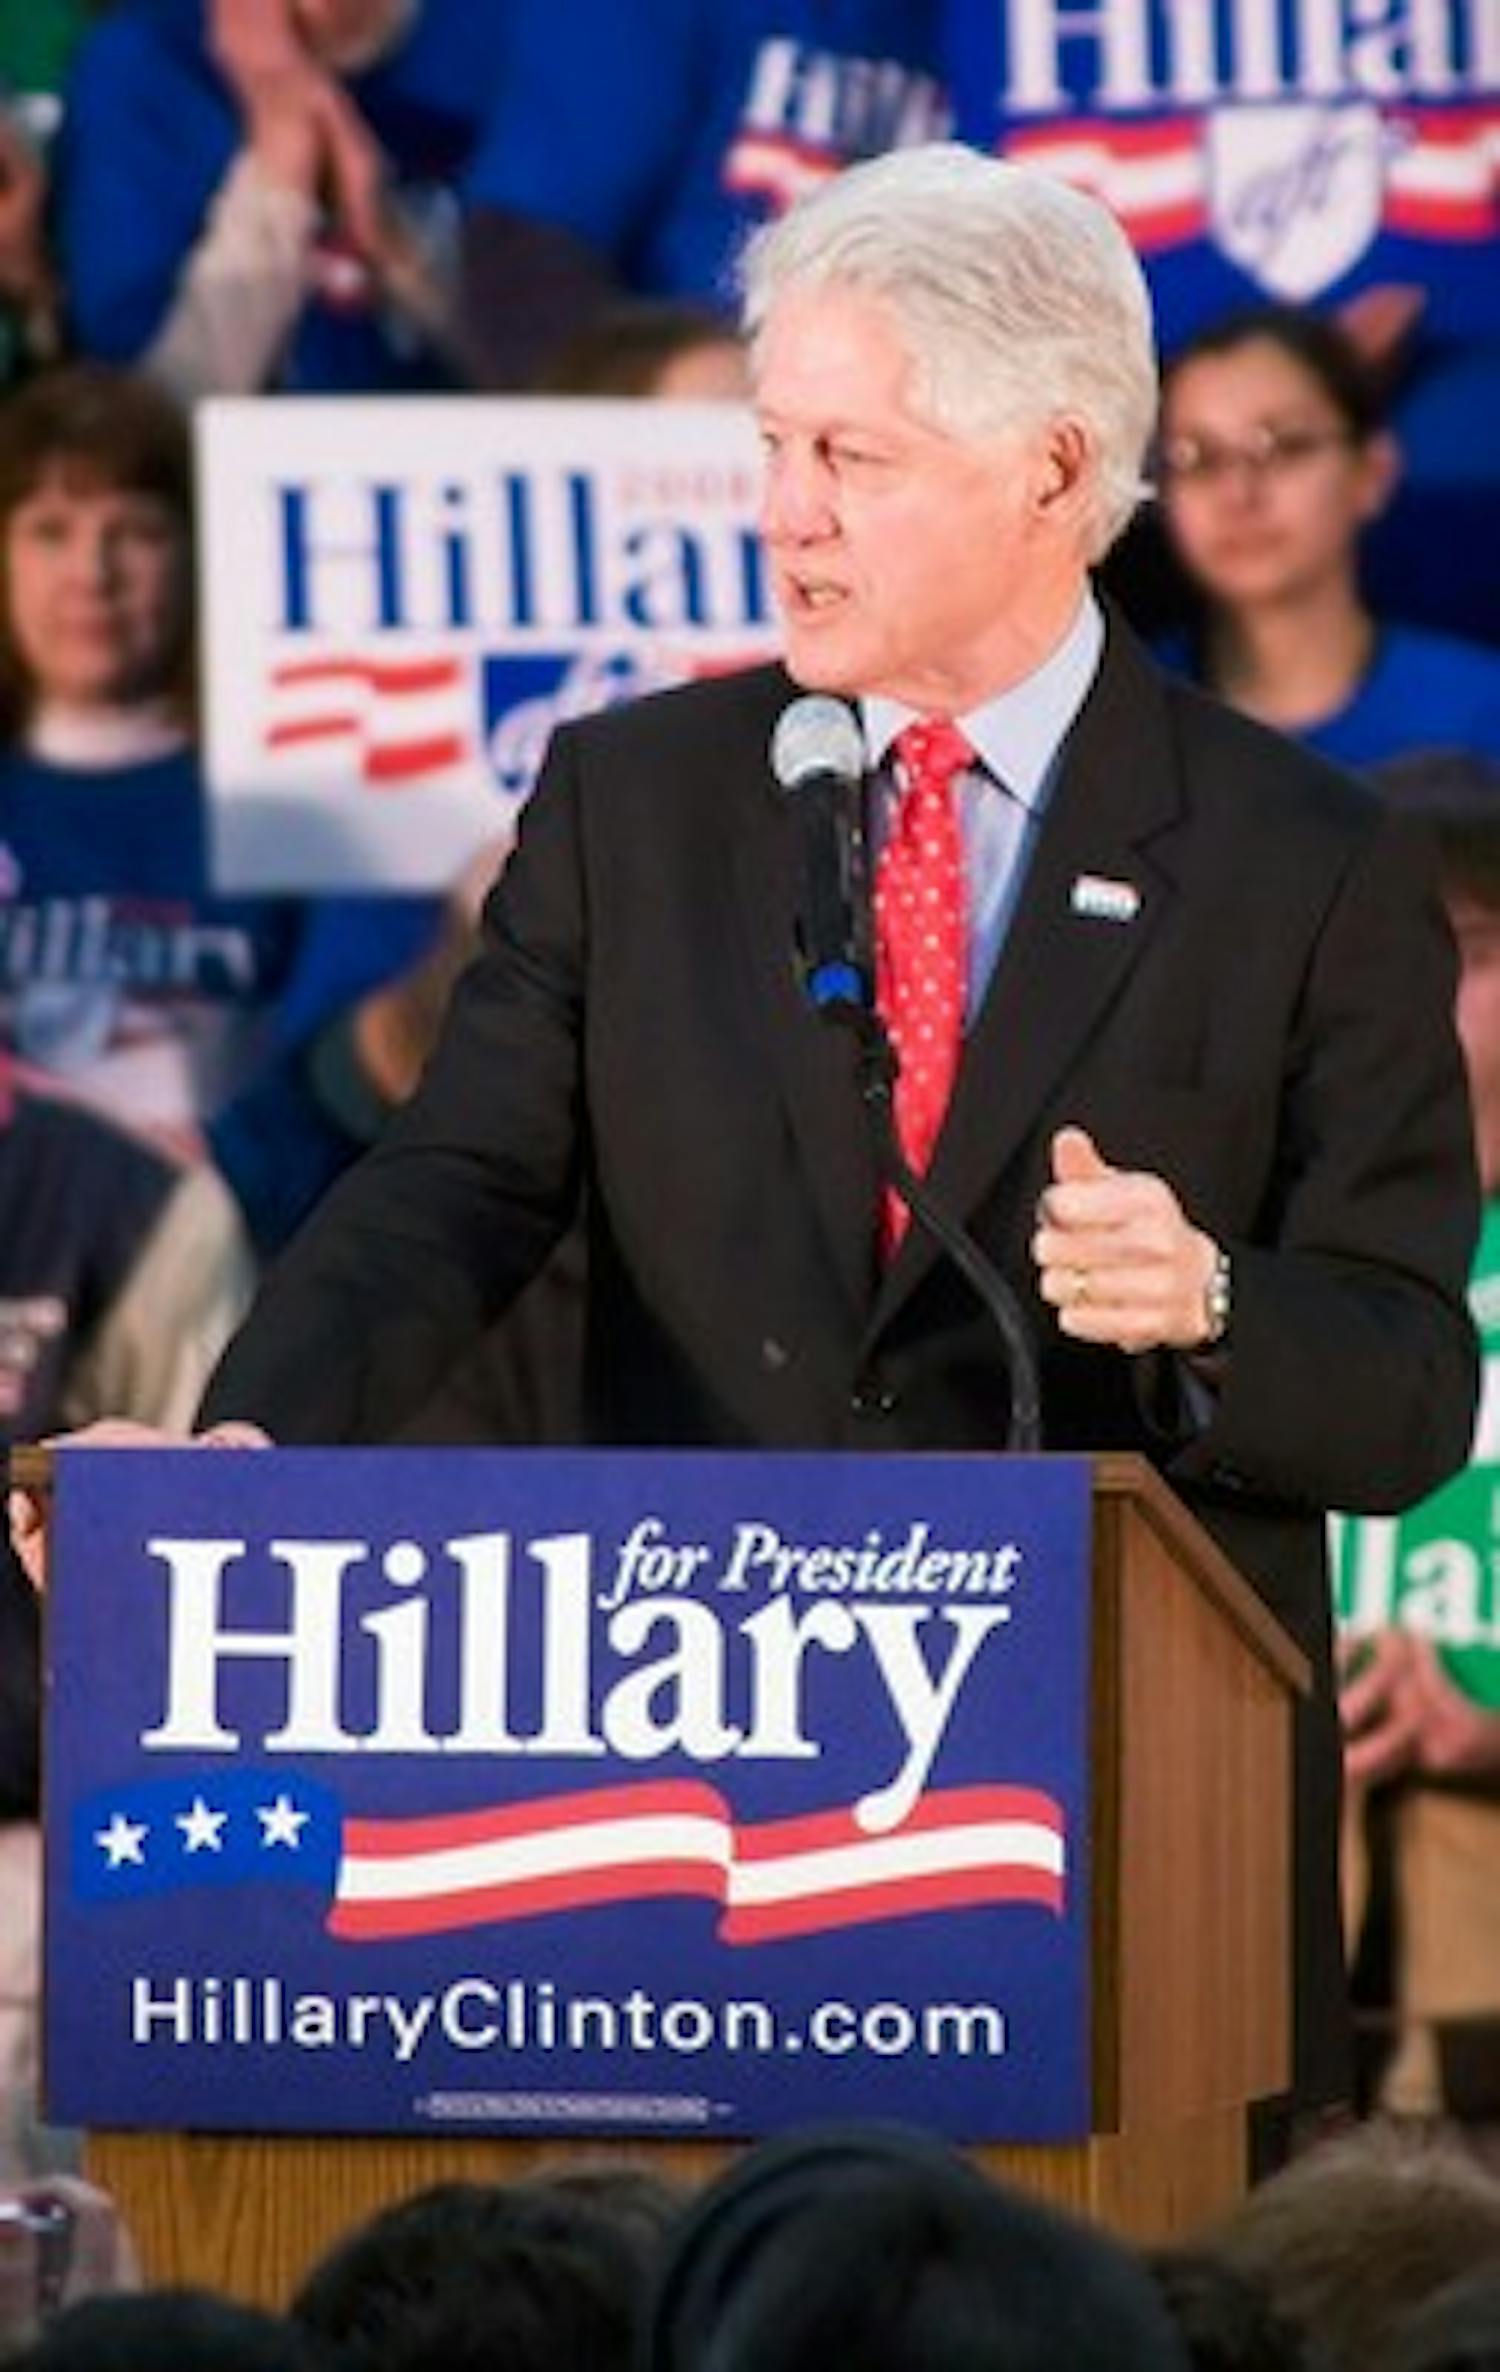 Bill Clinton focuses on policies, says Hillary has best record